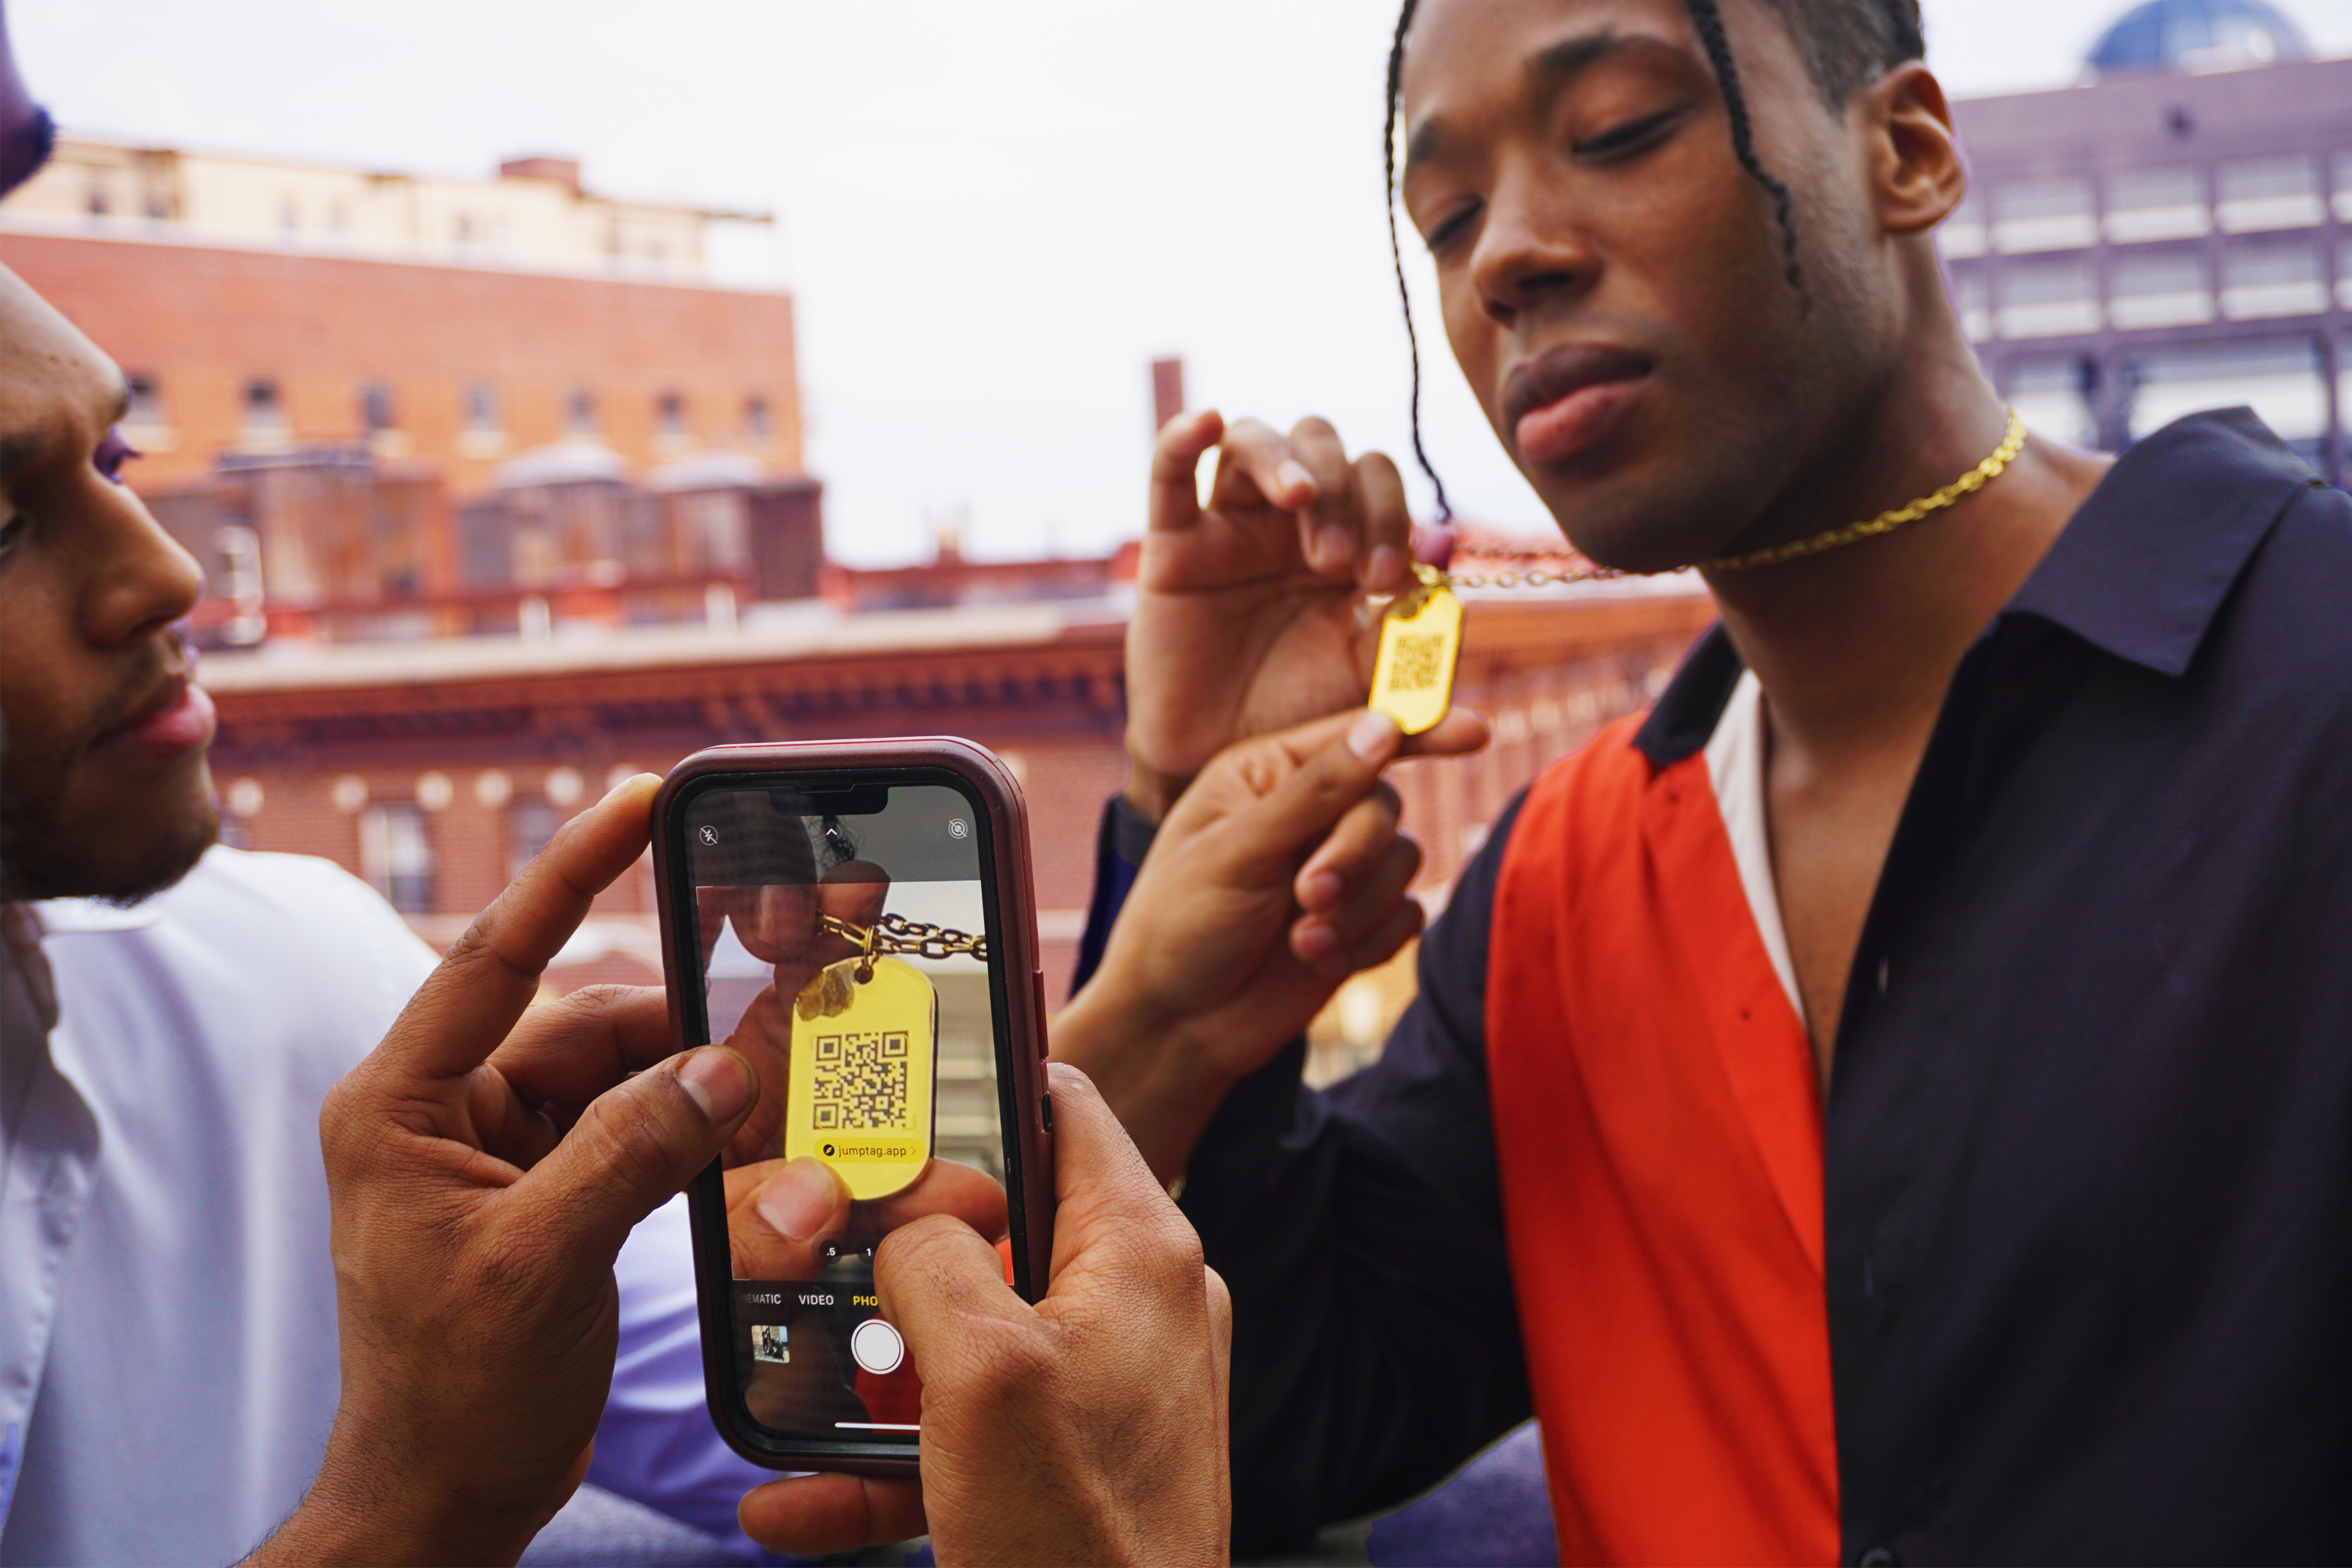 Shawn Red wearing a golden Jumptag QR necklace, a friend scans the dog tag with a phone's camera app & is visible on screen